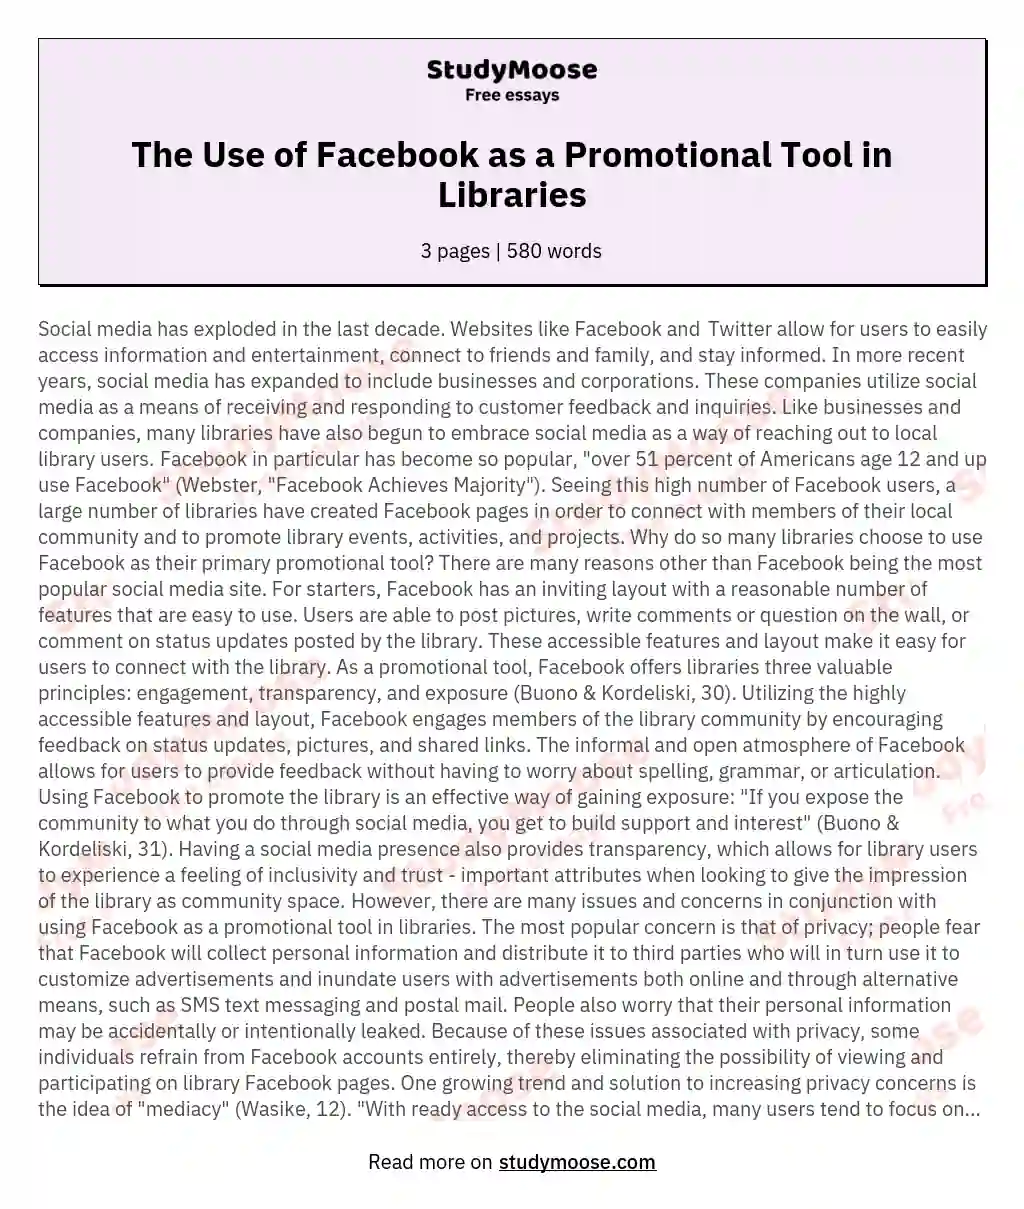 The Use of Facebook as a Promotional Tool in Libraries essay